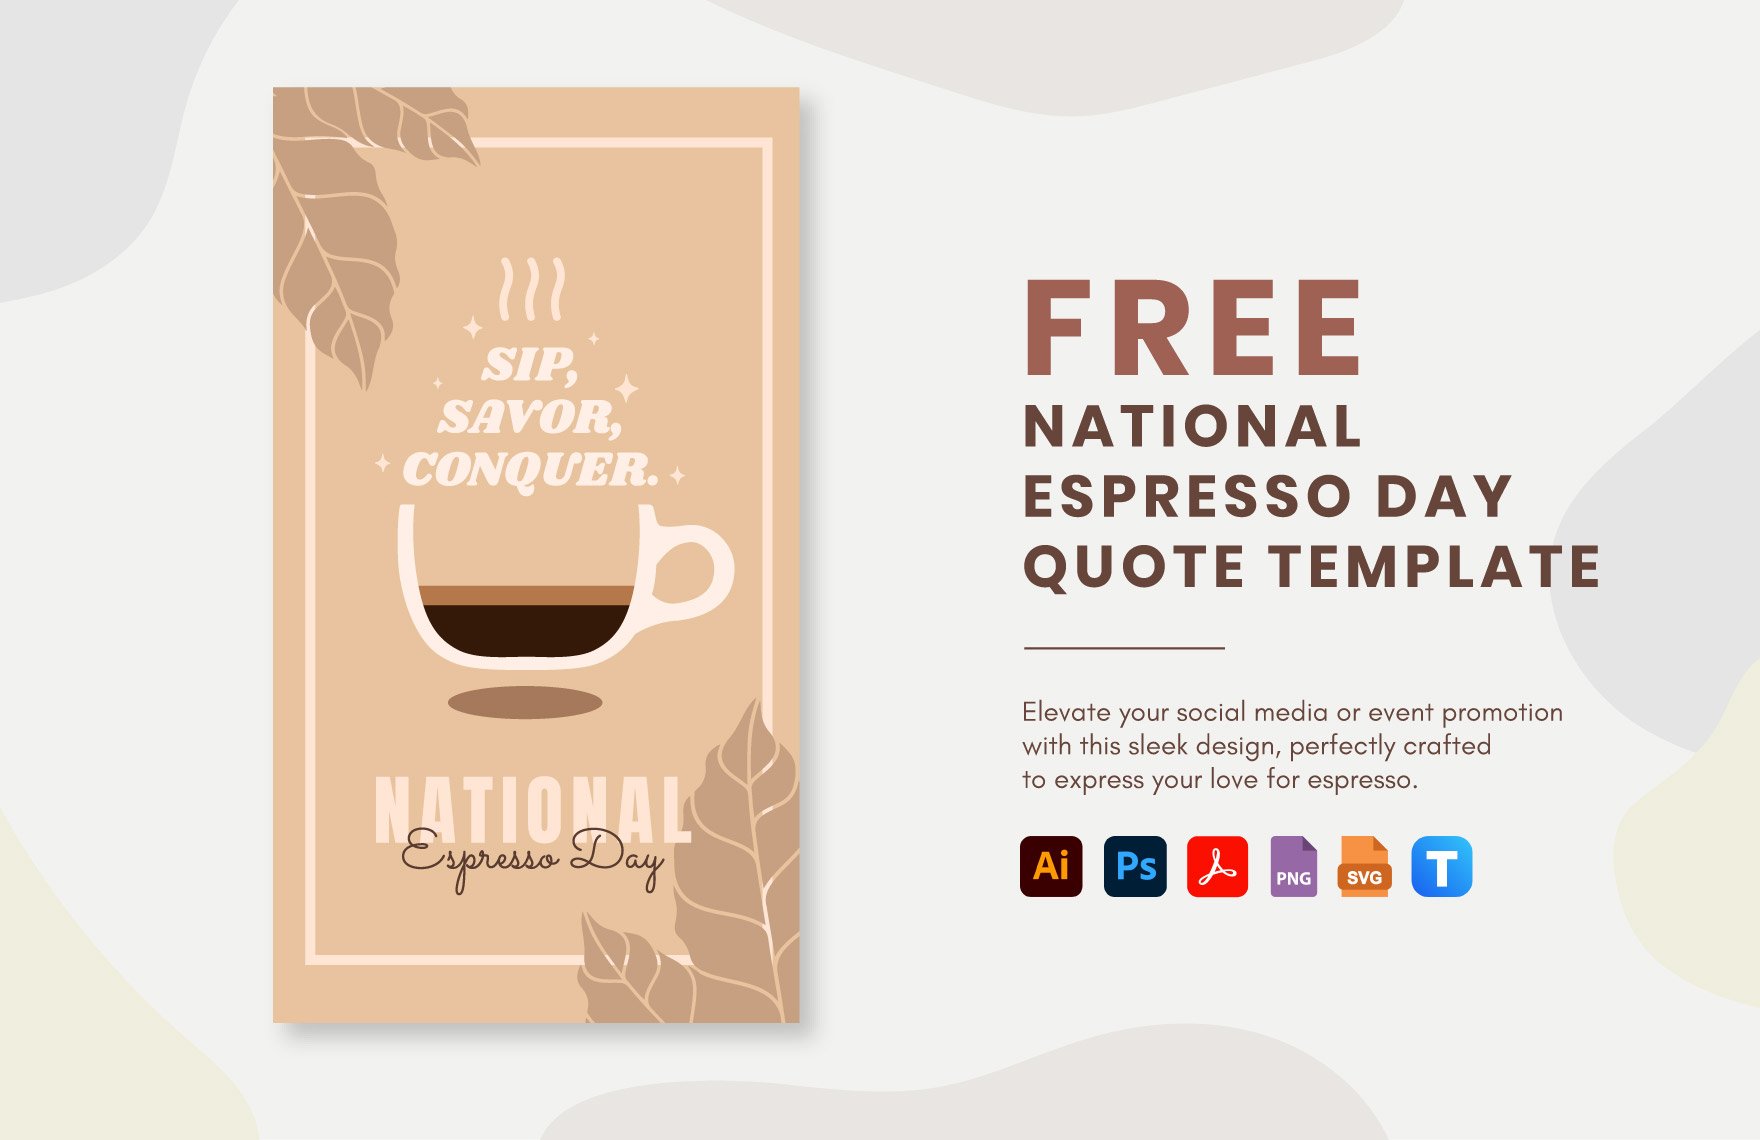 Free National Espresso Day Quote in PDF, Illustrator, PSD, SVG, PNG